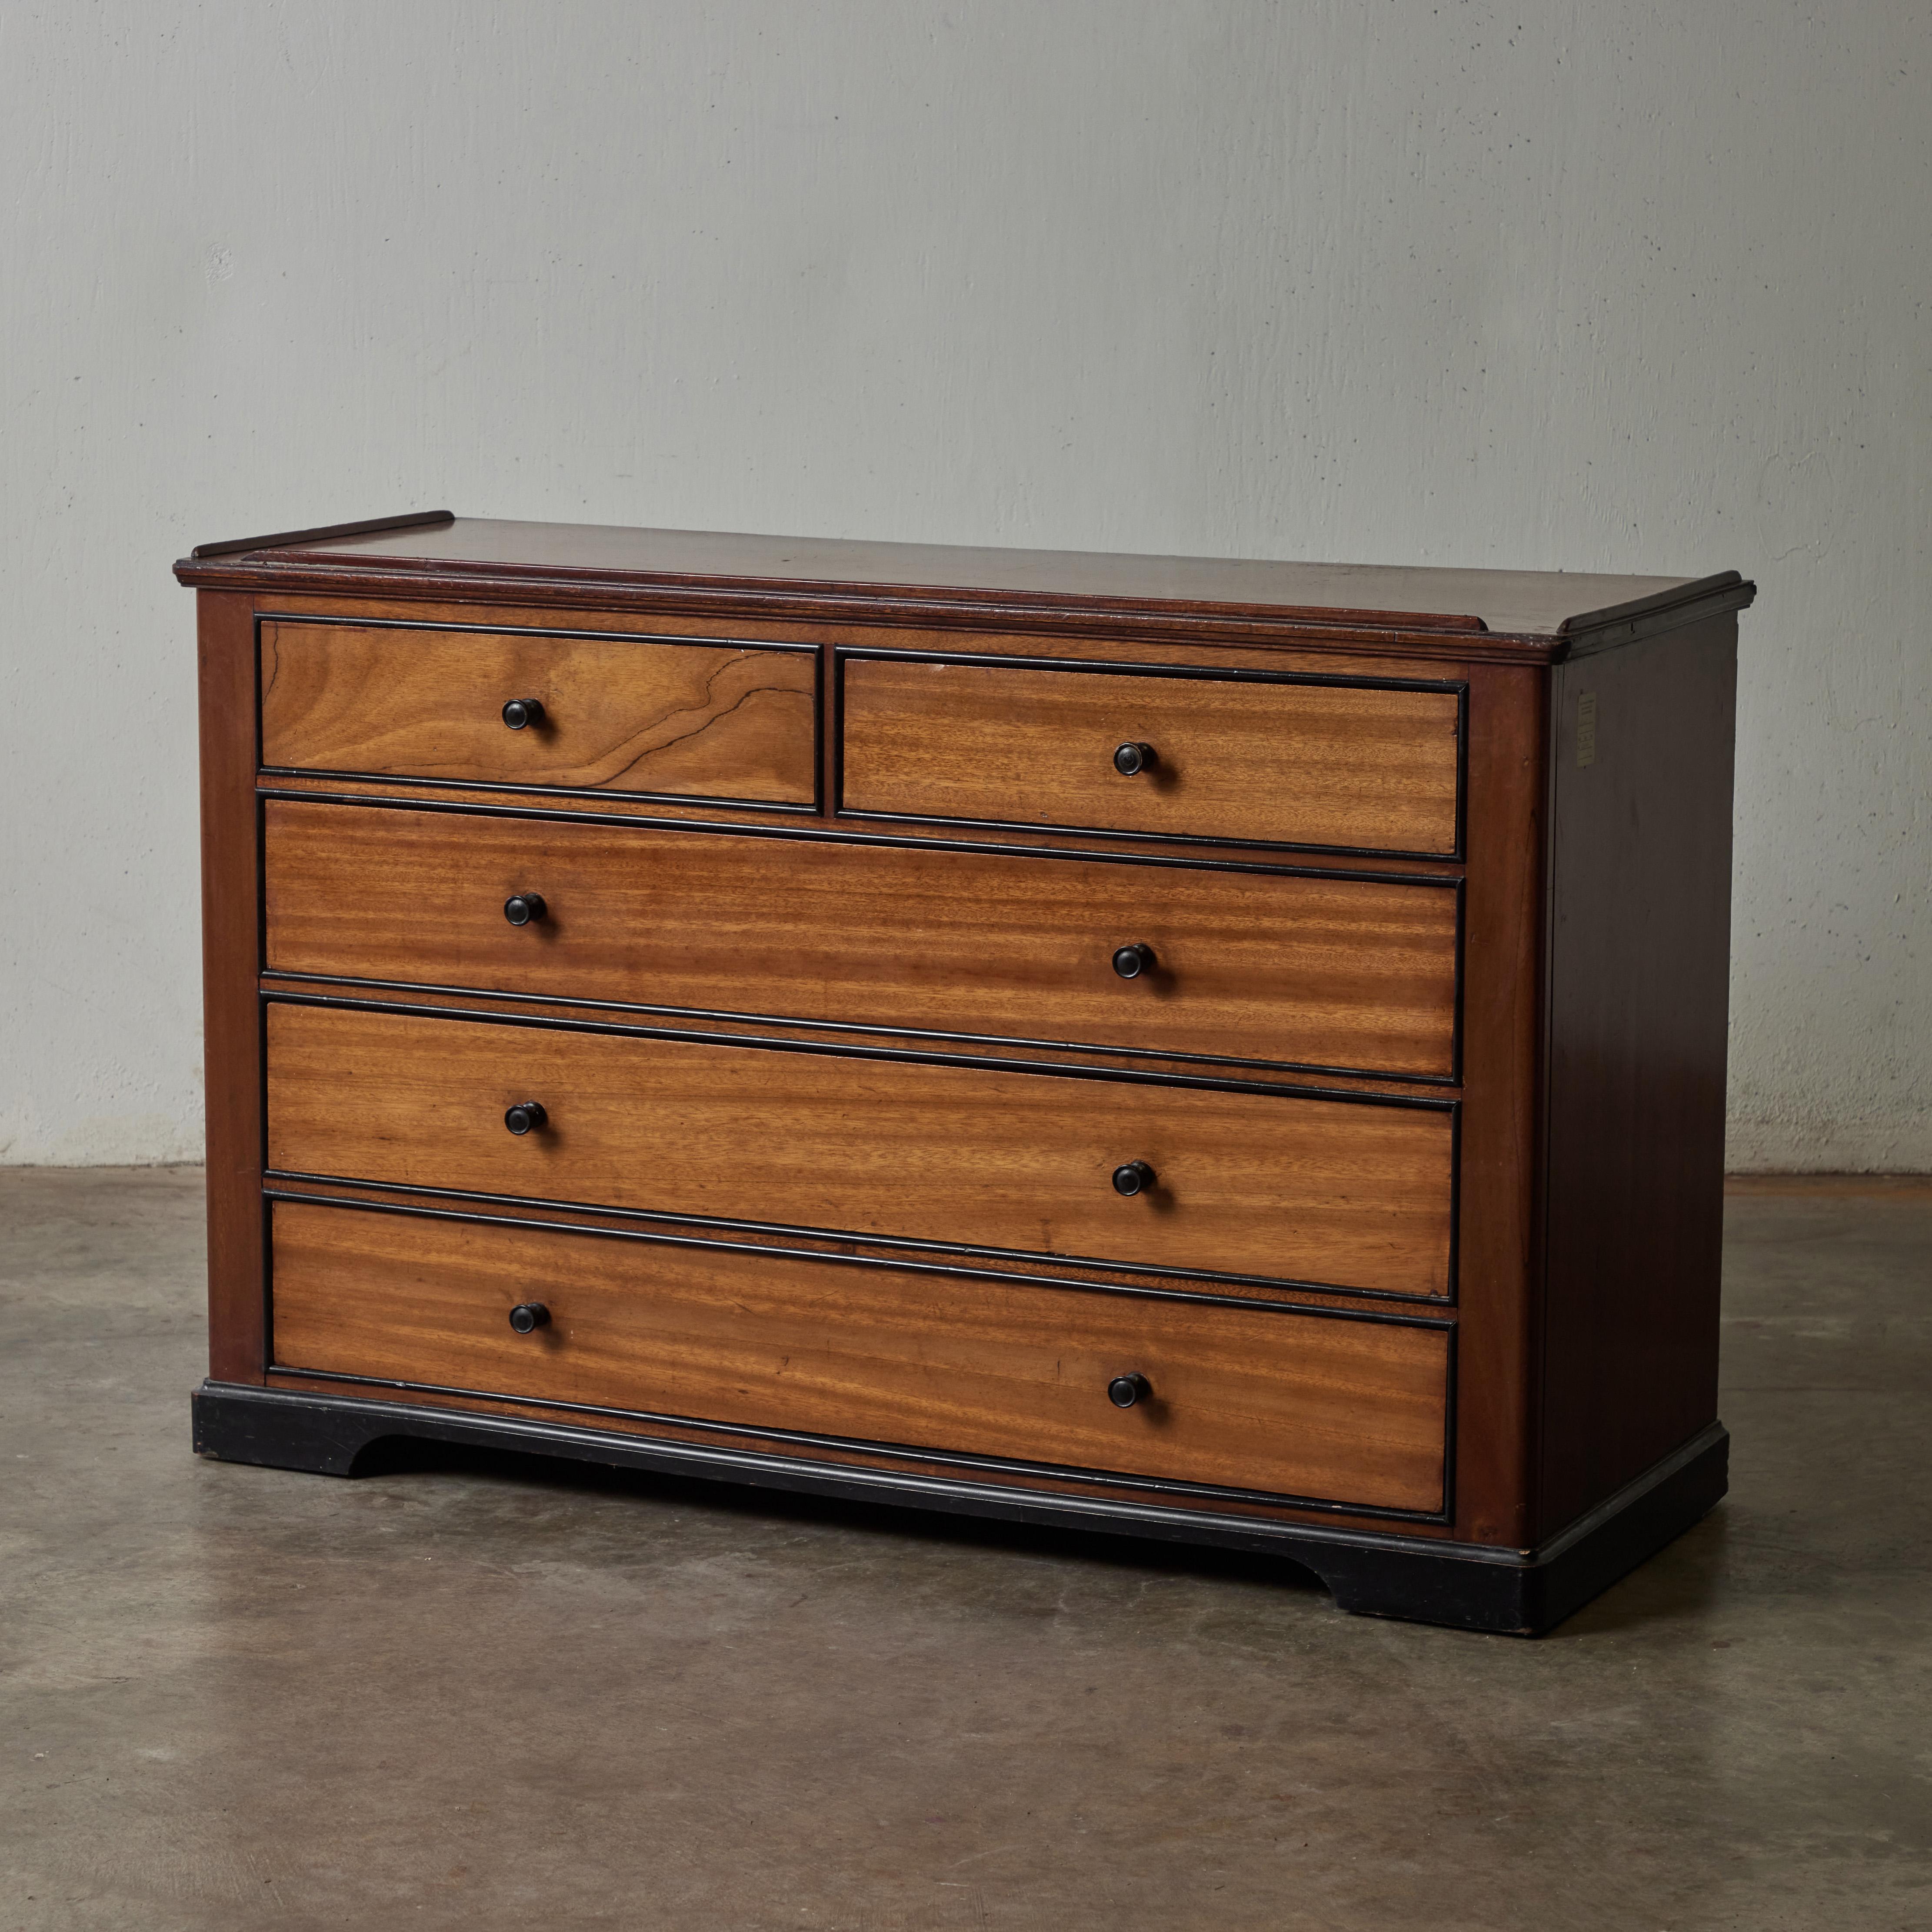 Mahogany chest of drawers with slim ebonized trim and round metal handles from the infamous White Star Line. The ill-fated shipping company was owners of both the Titanic and her sister ship, the Britannic, who went down in WWI. Well known for being